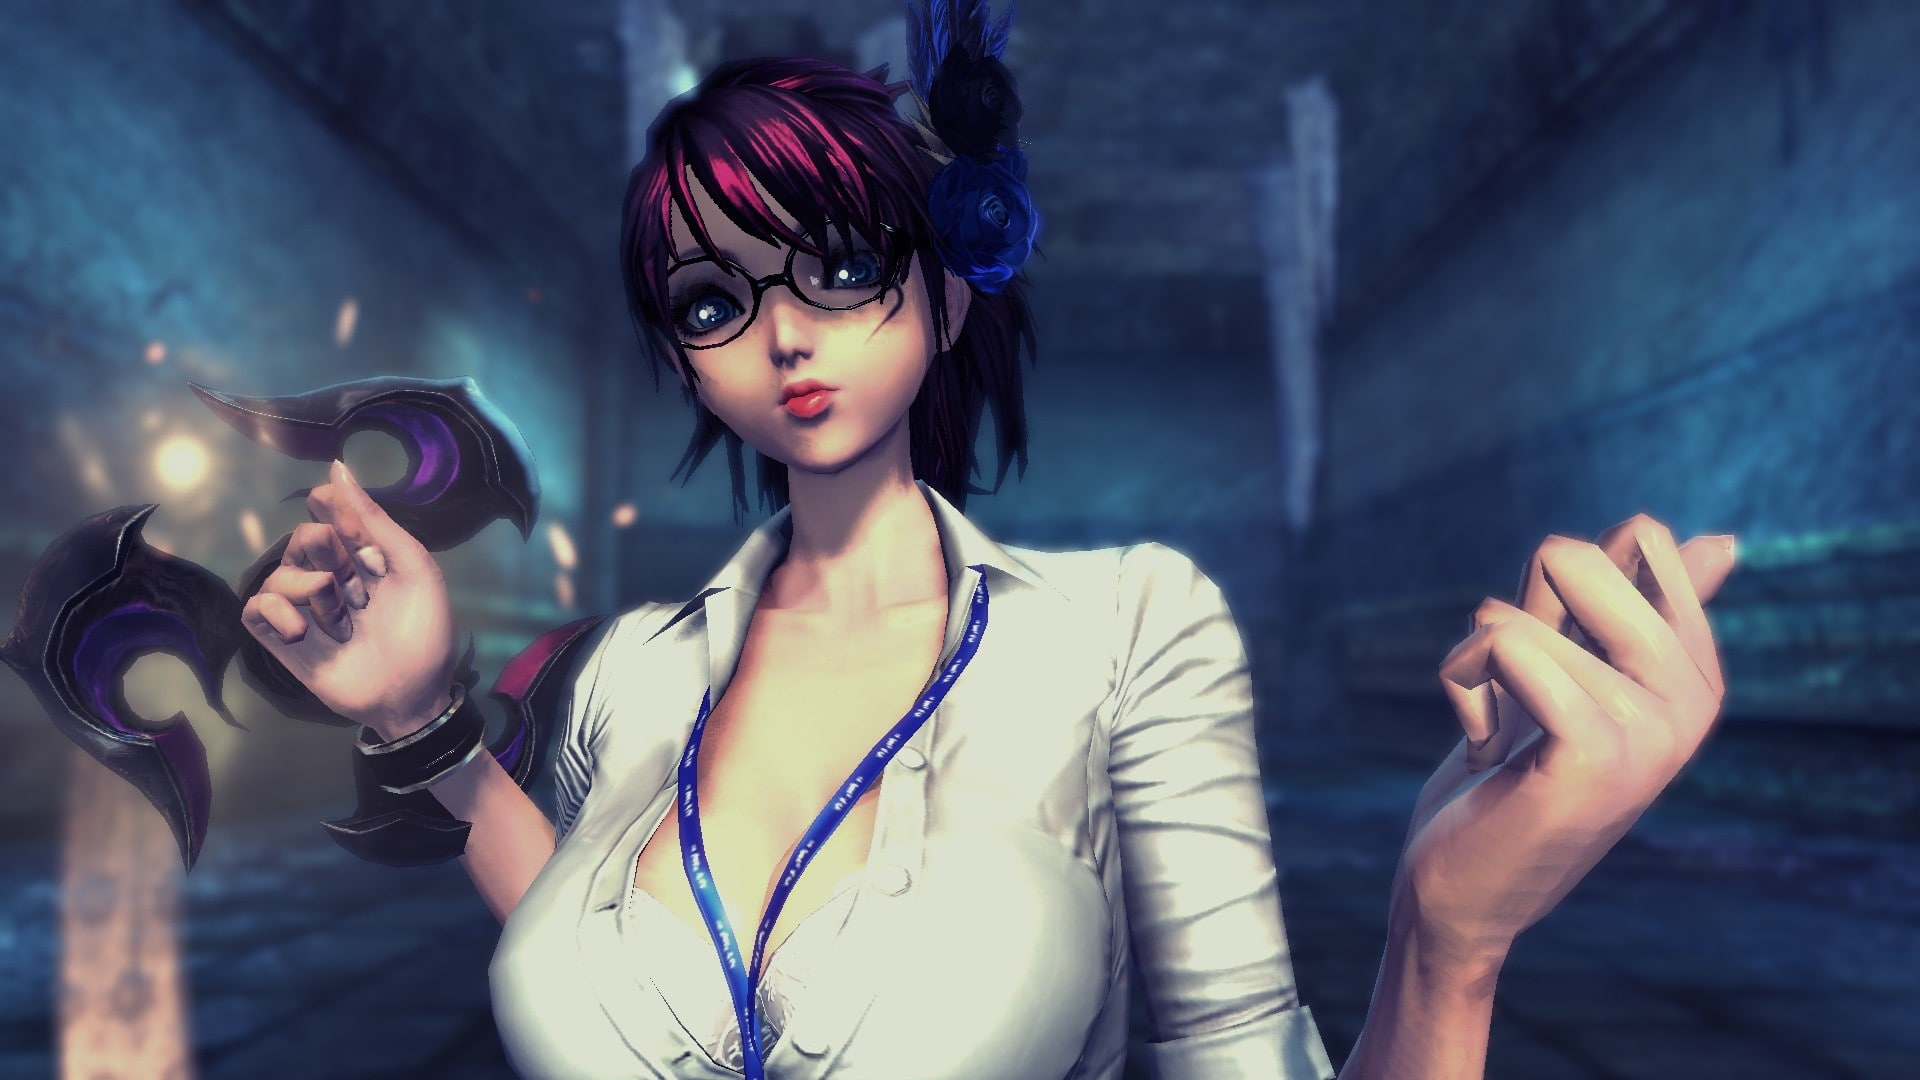 Blade and Soul, Online games, mmorpg, one person, young adult